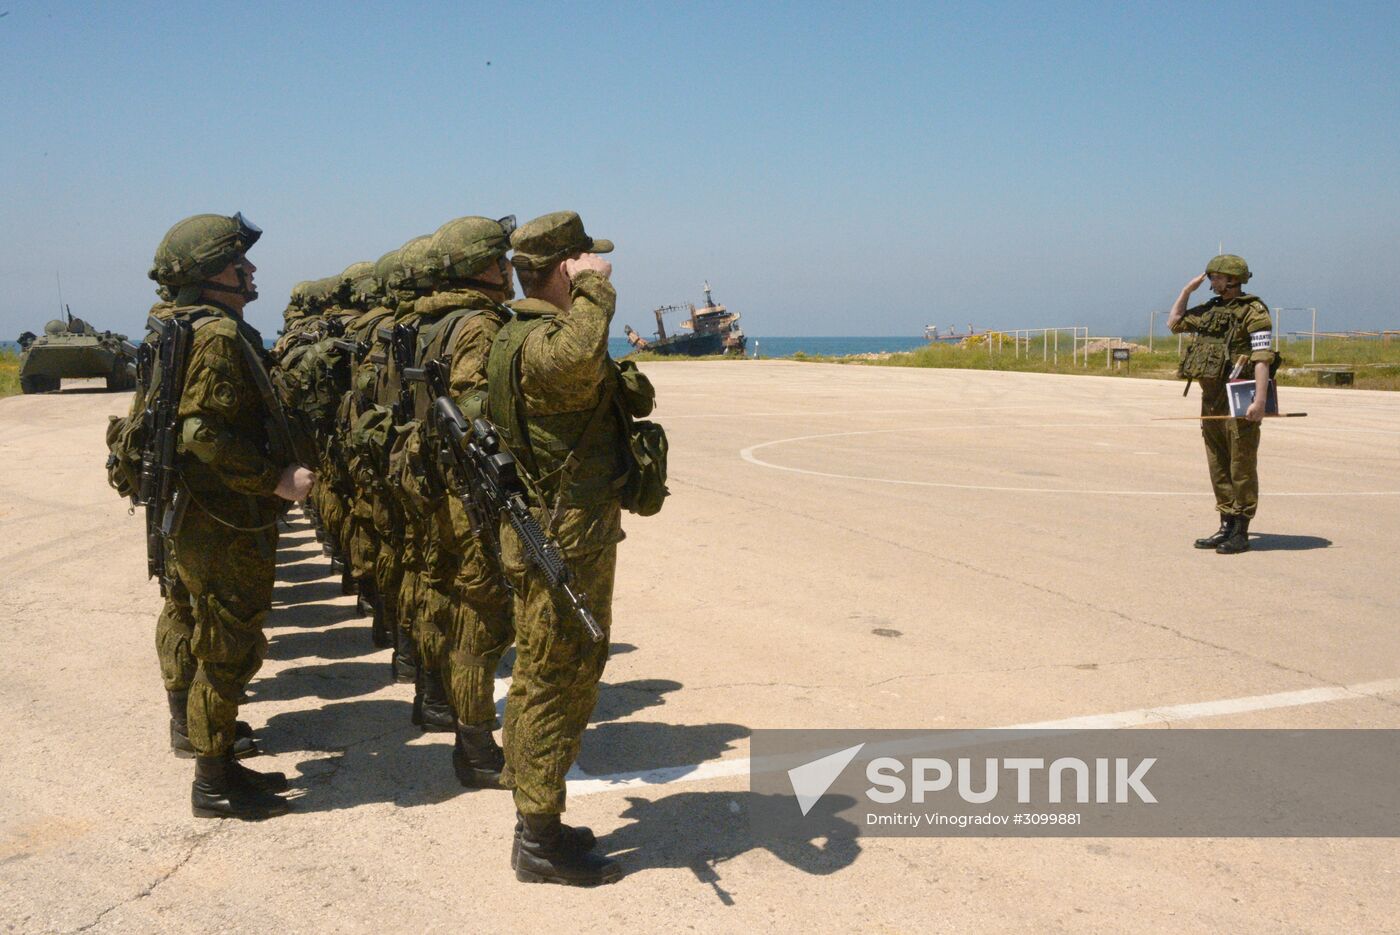 Joint Russian-Syrian military exercise in Tartous